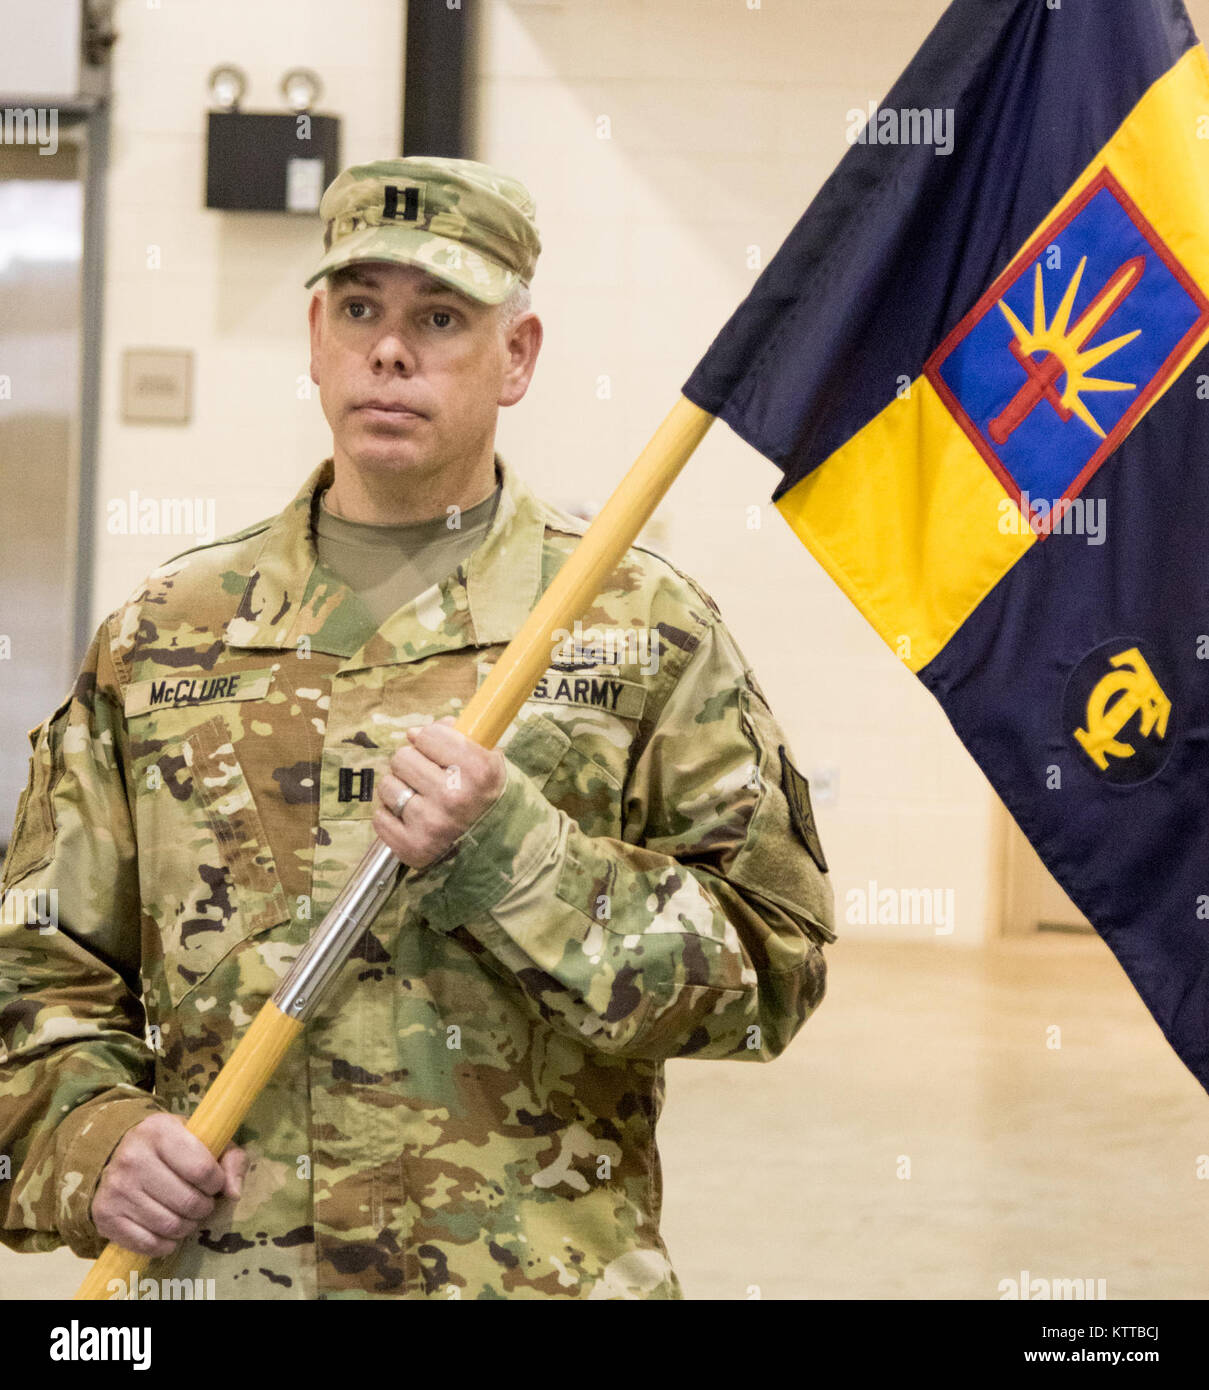 U.S. Army Cpt. Andrew S. Mcclure, the deputy G4, 53d Troop Command, New York Army National Guard, takes command of the 53d Headquarters Headquarters Detachment during a ceremony at Camp Smith June 1, 2017. (U.S. Army National Guard photo by Staff Sgt. Michael Davis) Stock Photo